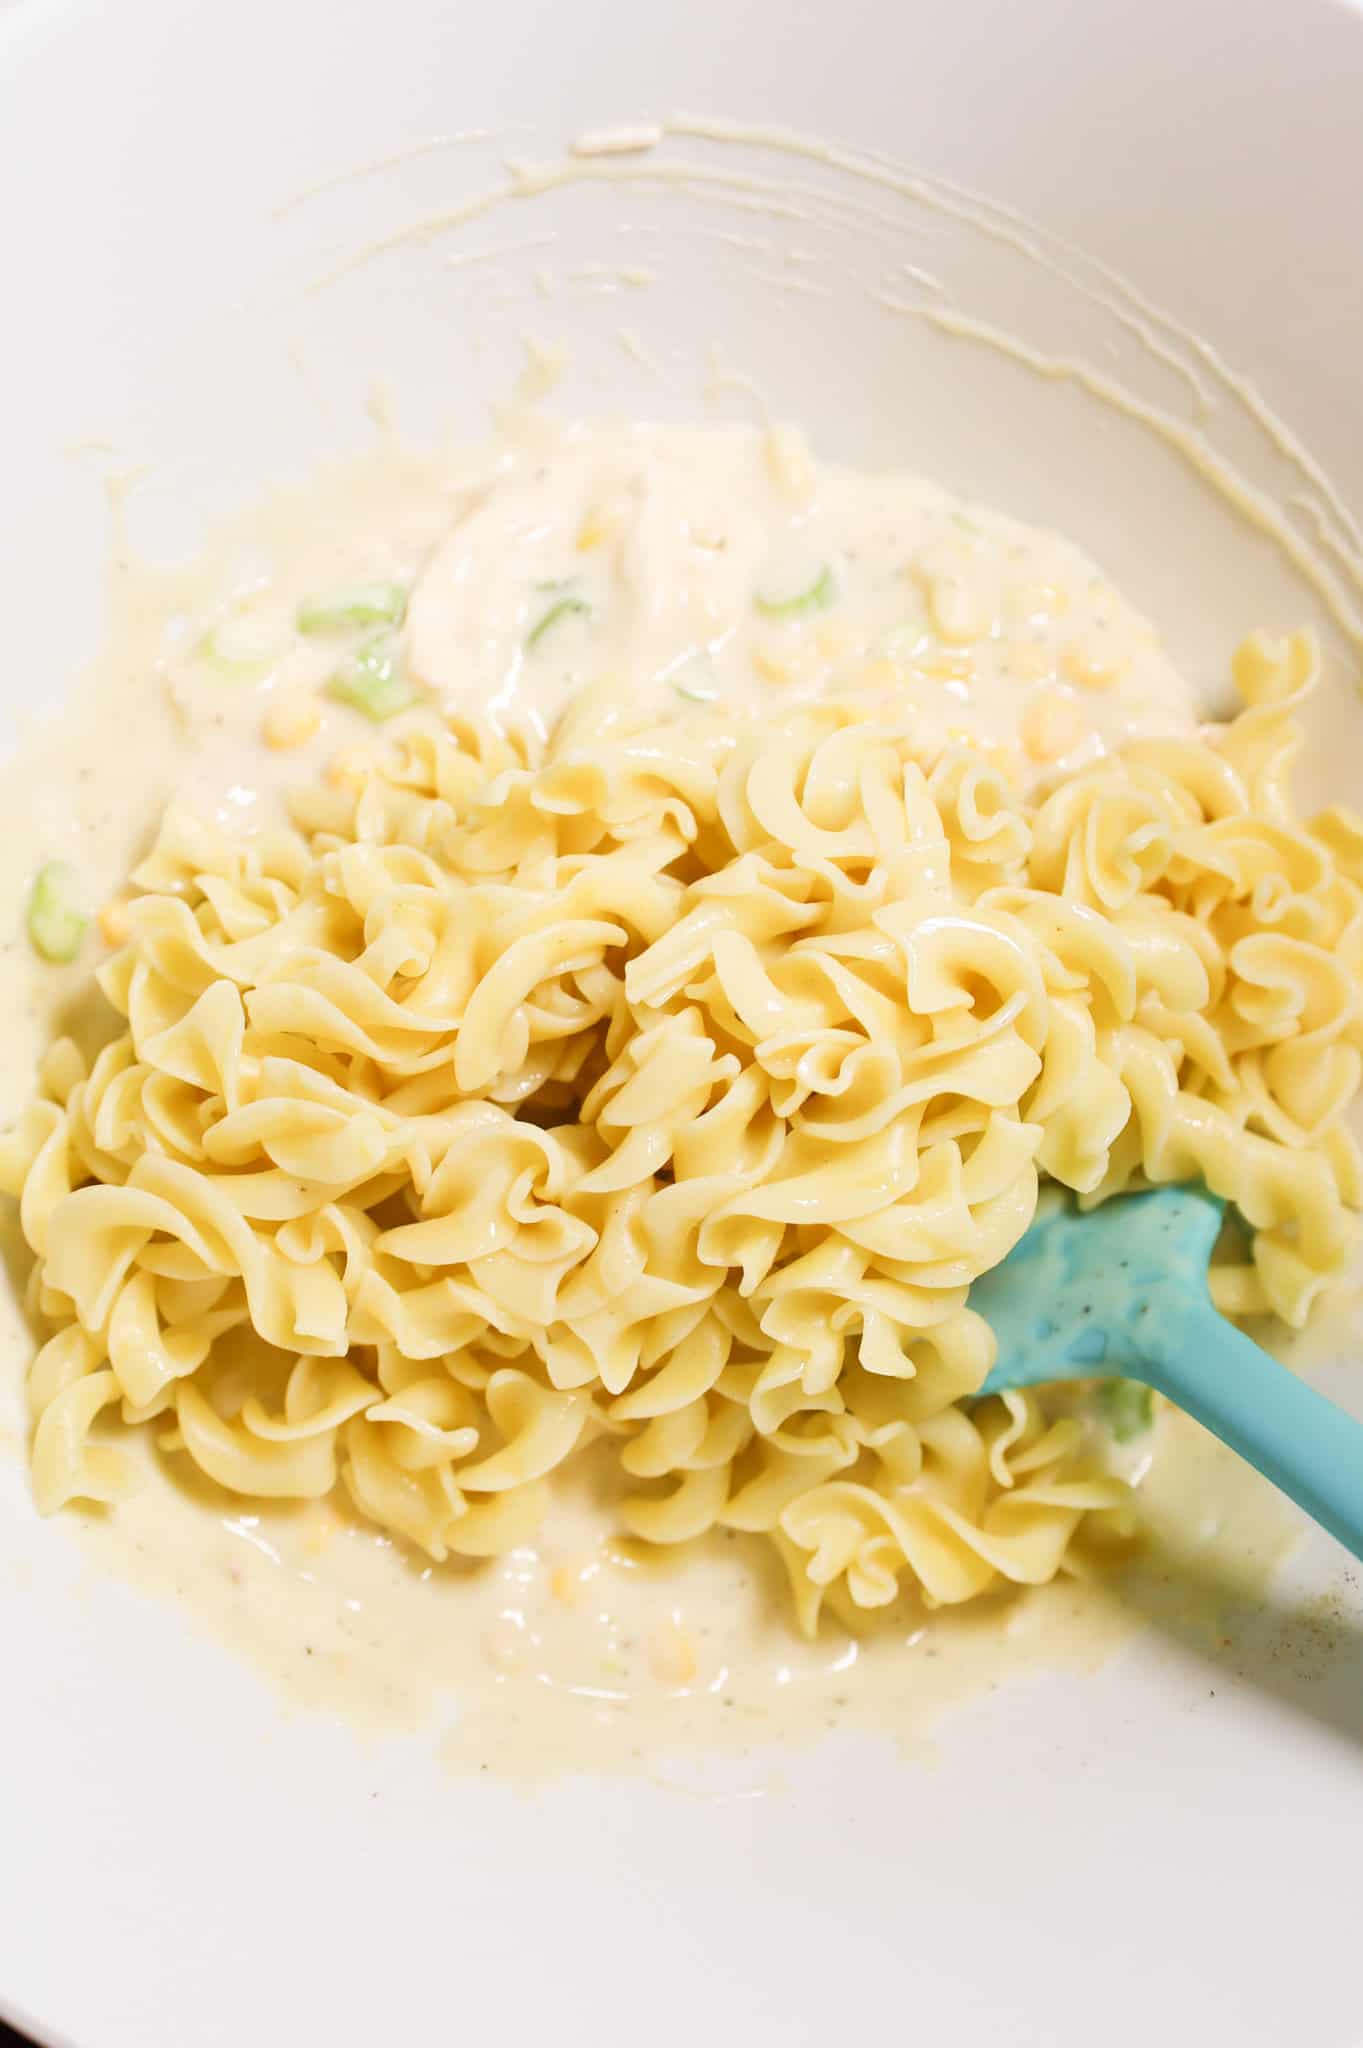 cooked egg noodles on top of creamy soup mixture in a mixing bowl